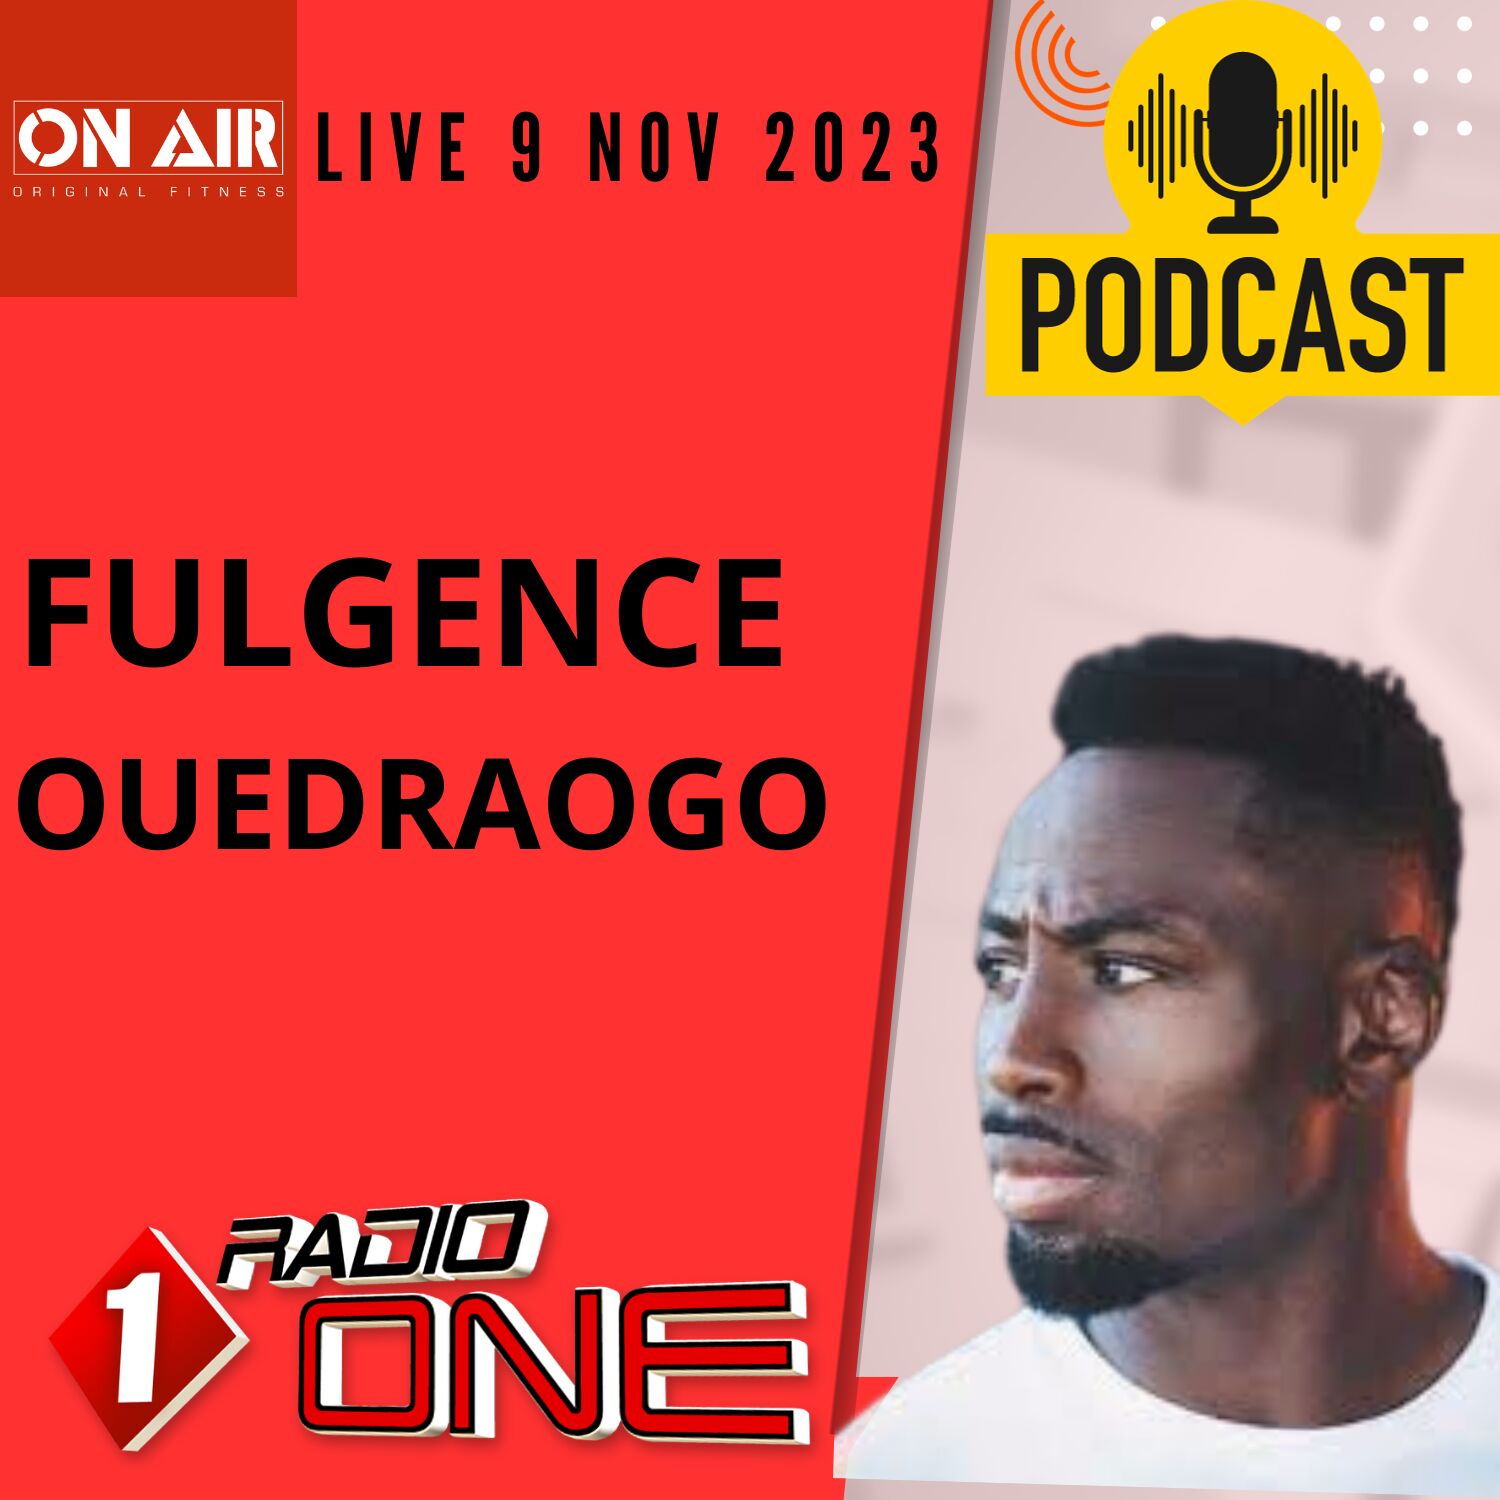 ON AIR FULGENCE OUEDRAOGO